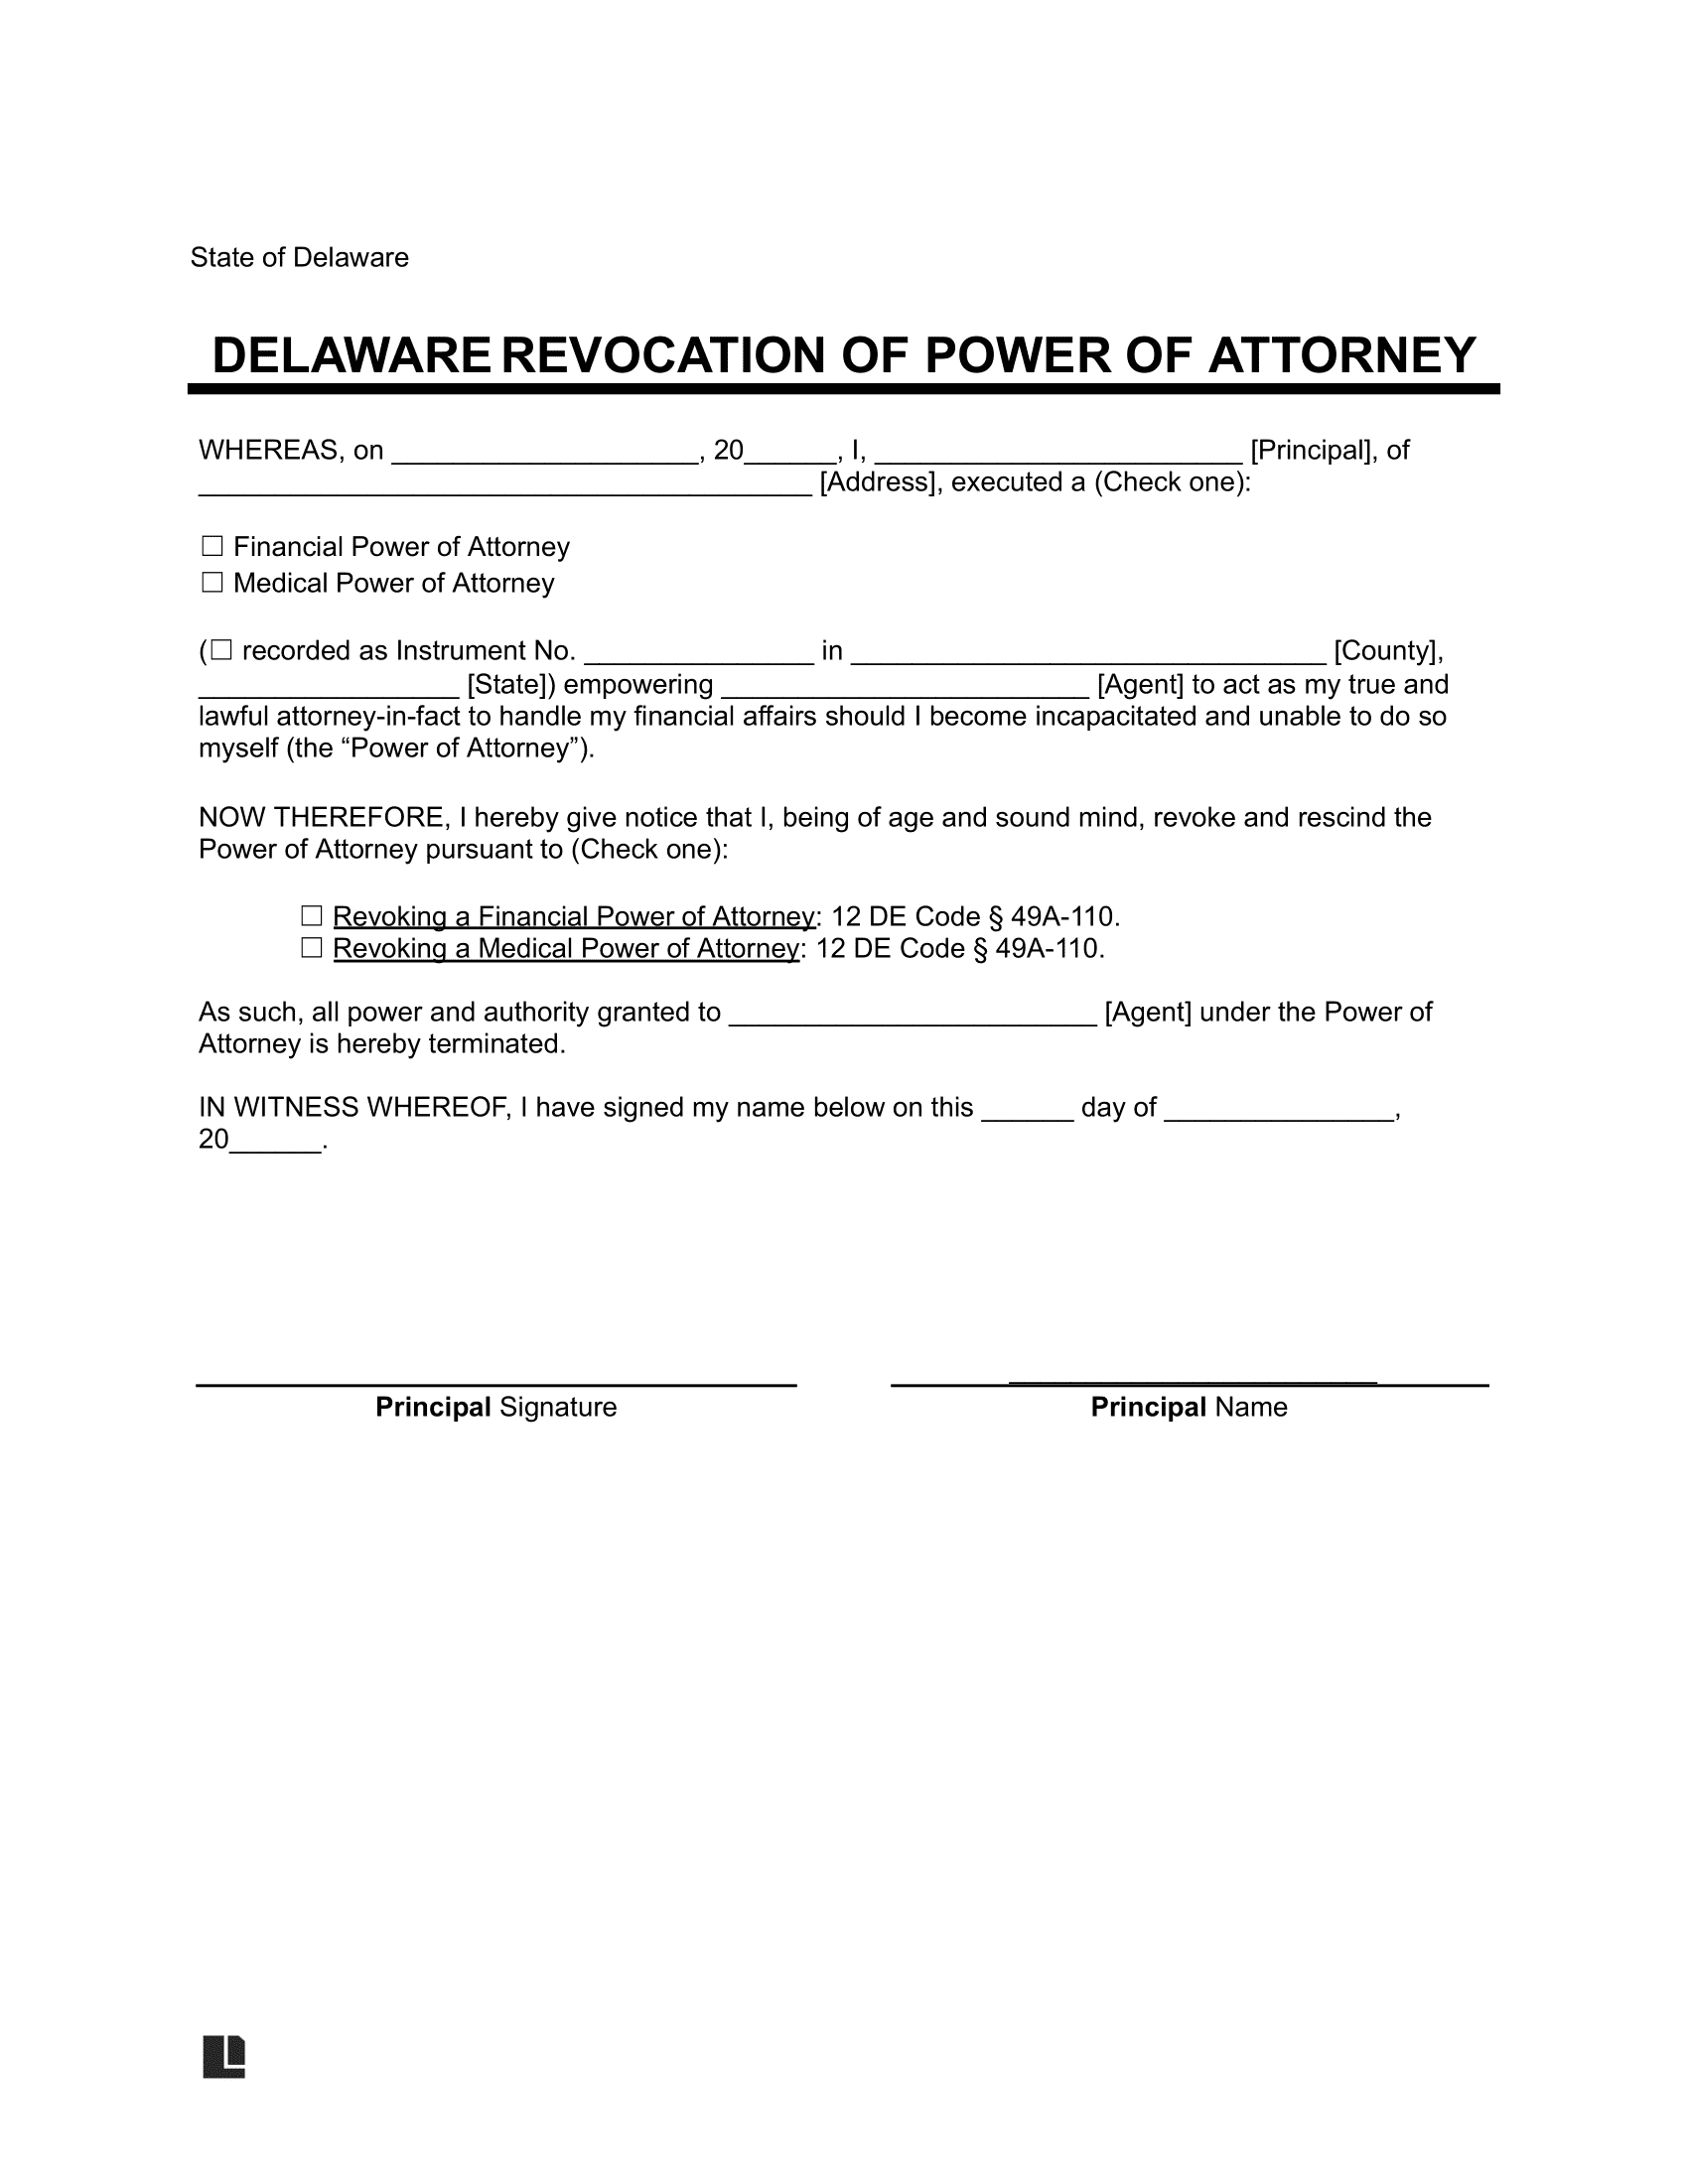 Delaware Revocation Power of Attorney Form